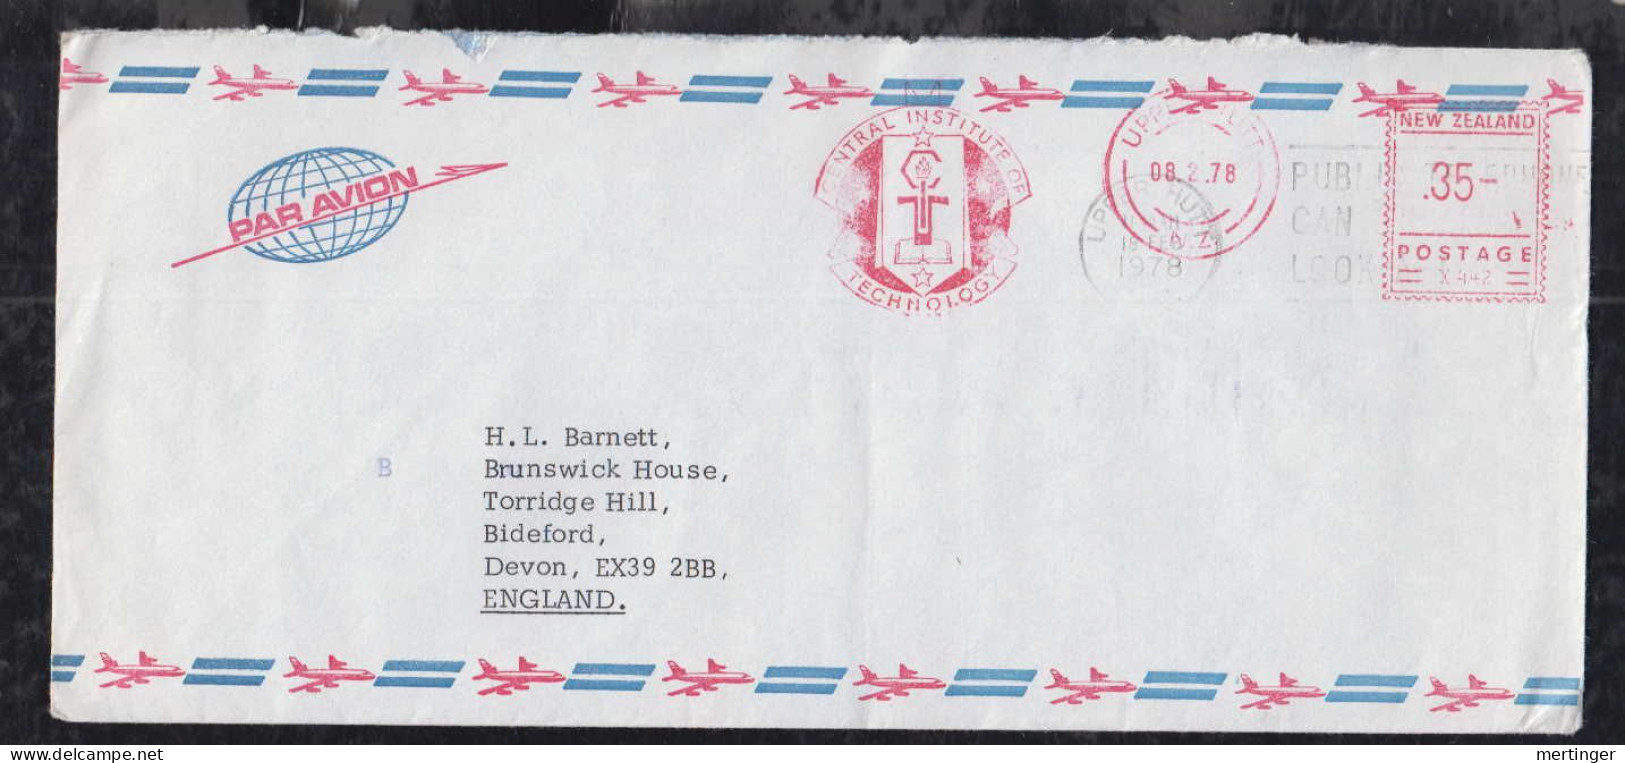 New Zealand 1978 Meter Airmail Cover 35c UPPER HUTT To Bideford England Central Institute Of Technology - Cartas & Documentos